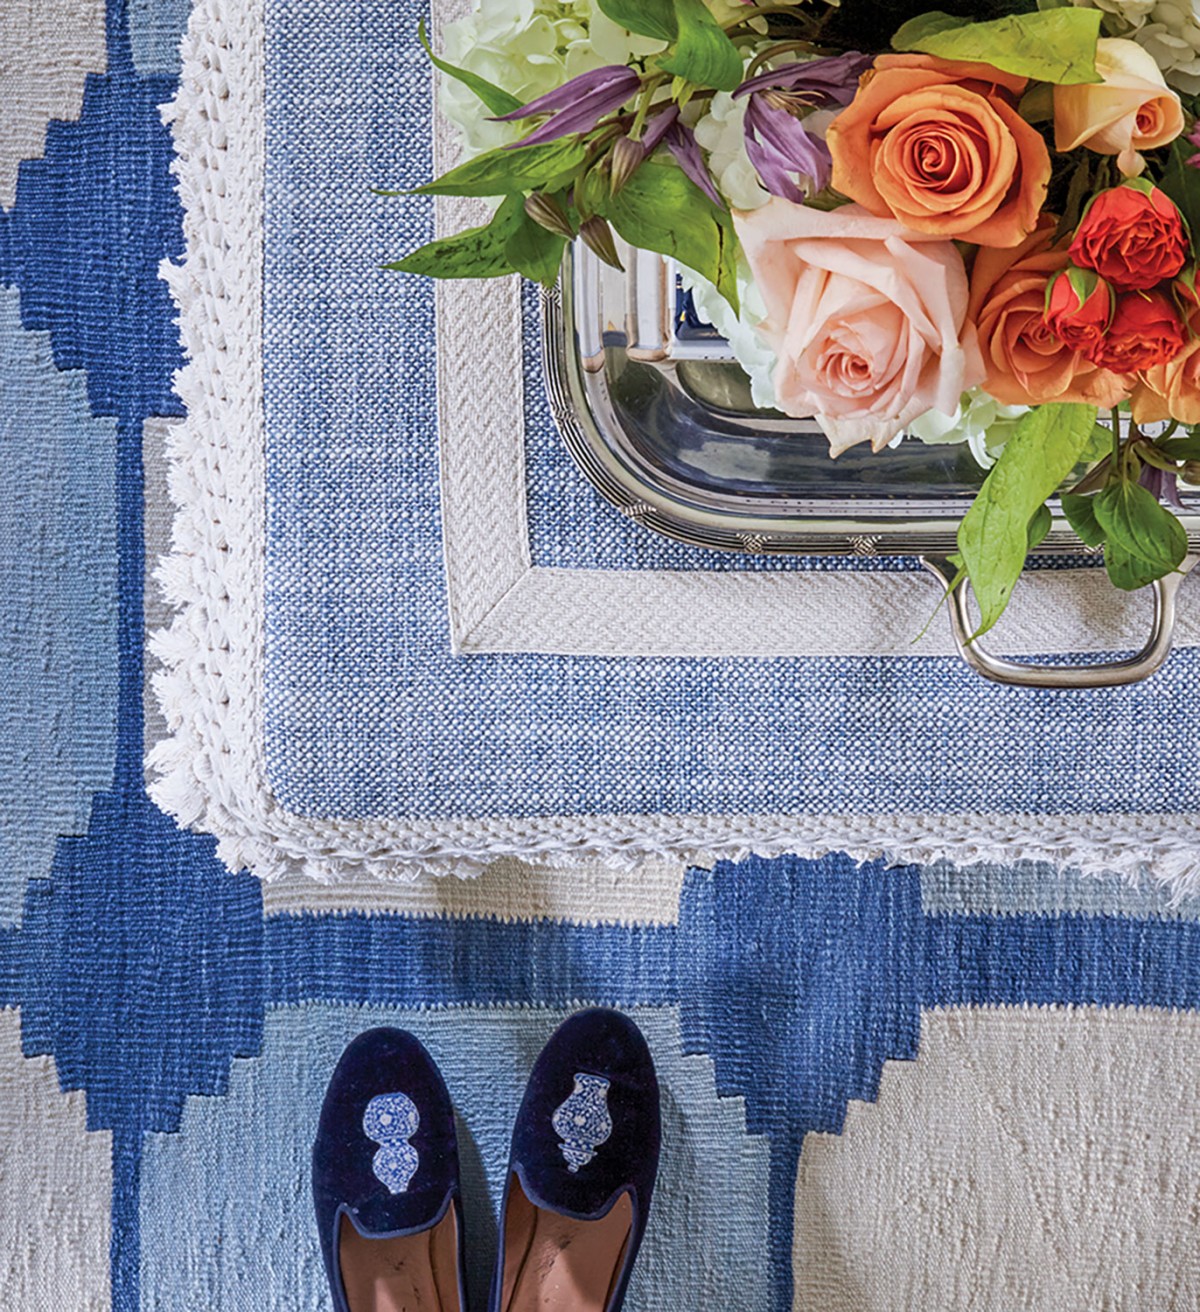 Close up of rug and bench cover with arrangement of roses, blue slippers on floor.